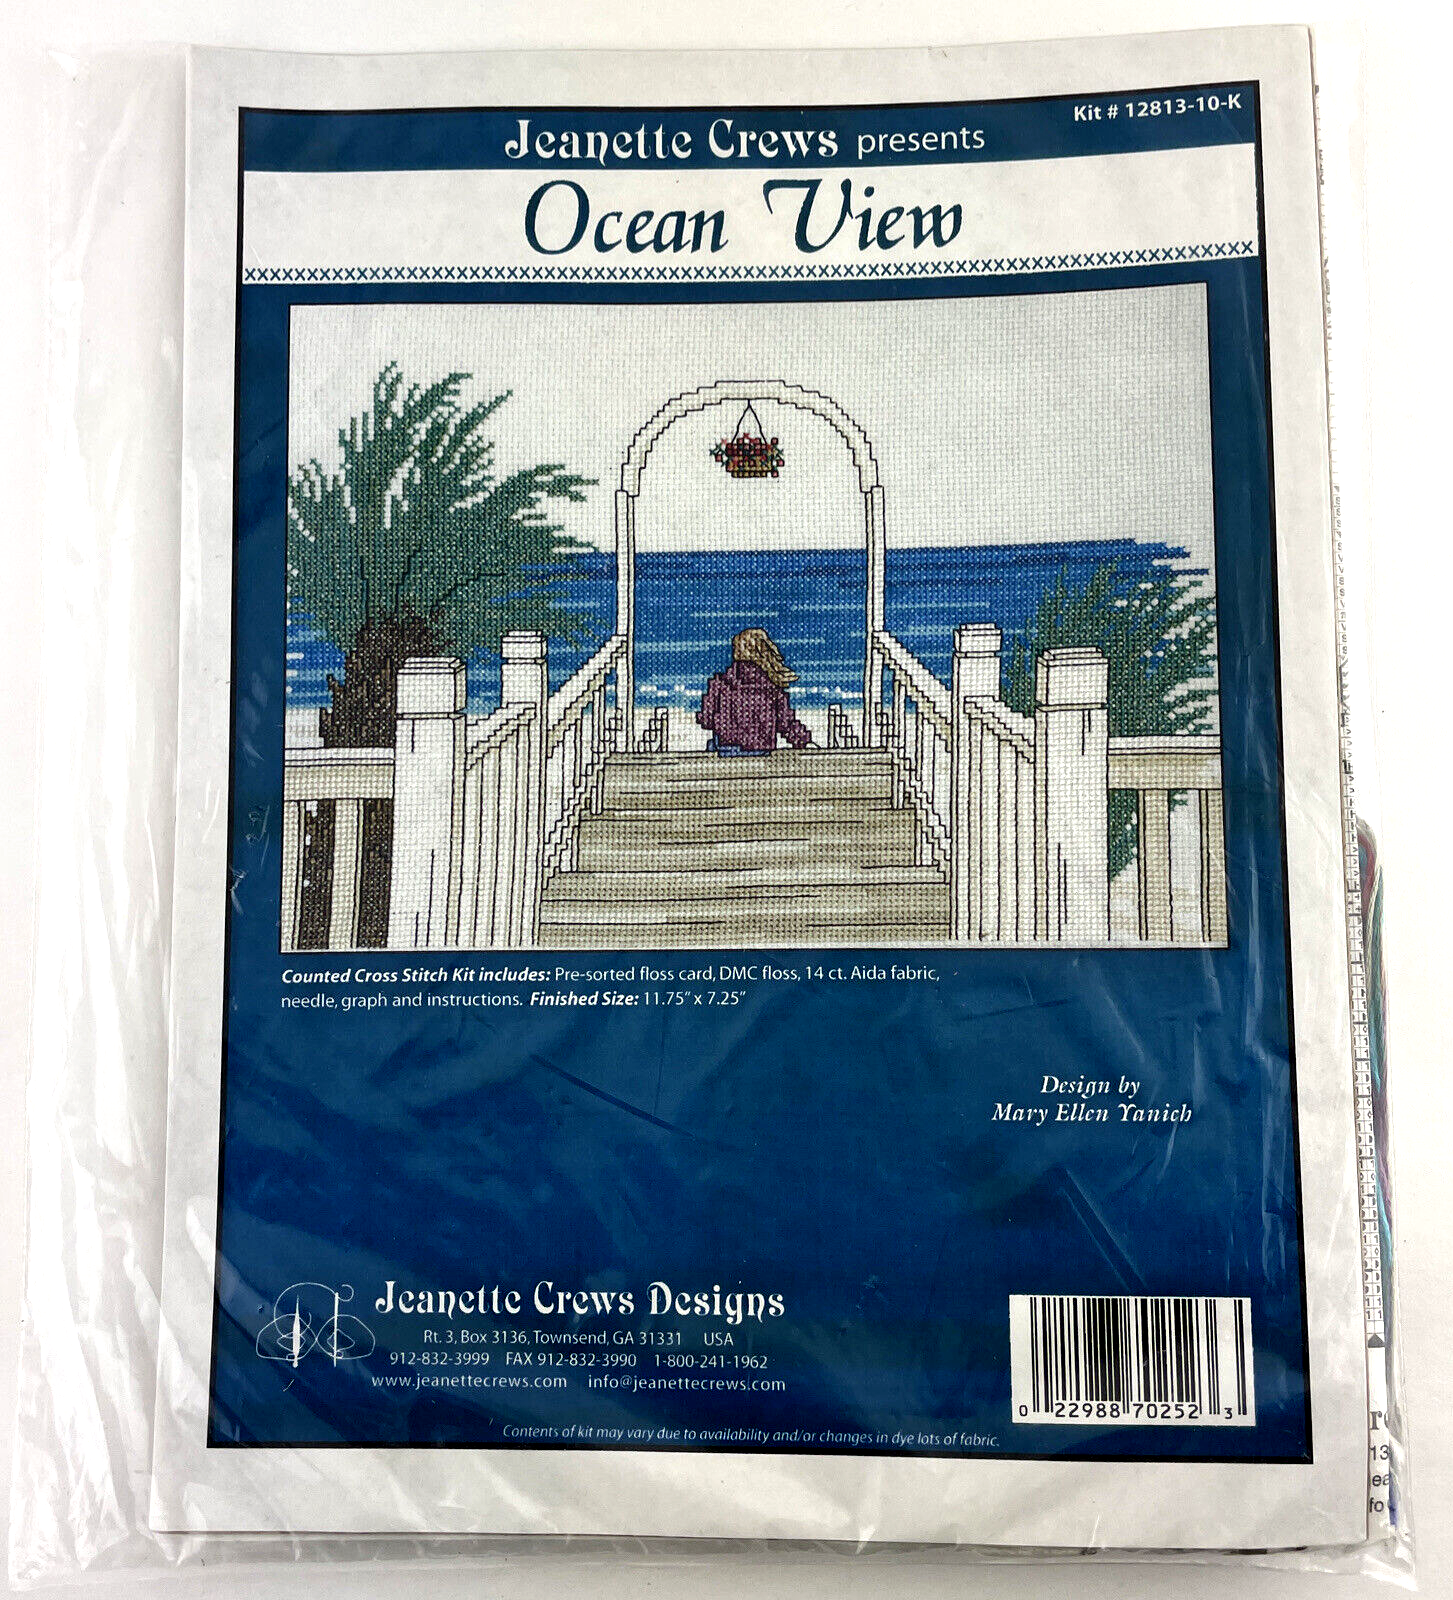 Primary image for Jeanette Crews Cross Stitch Kit Ocean View from Deck 12813-10-K 